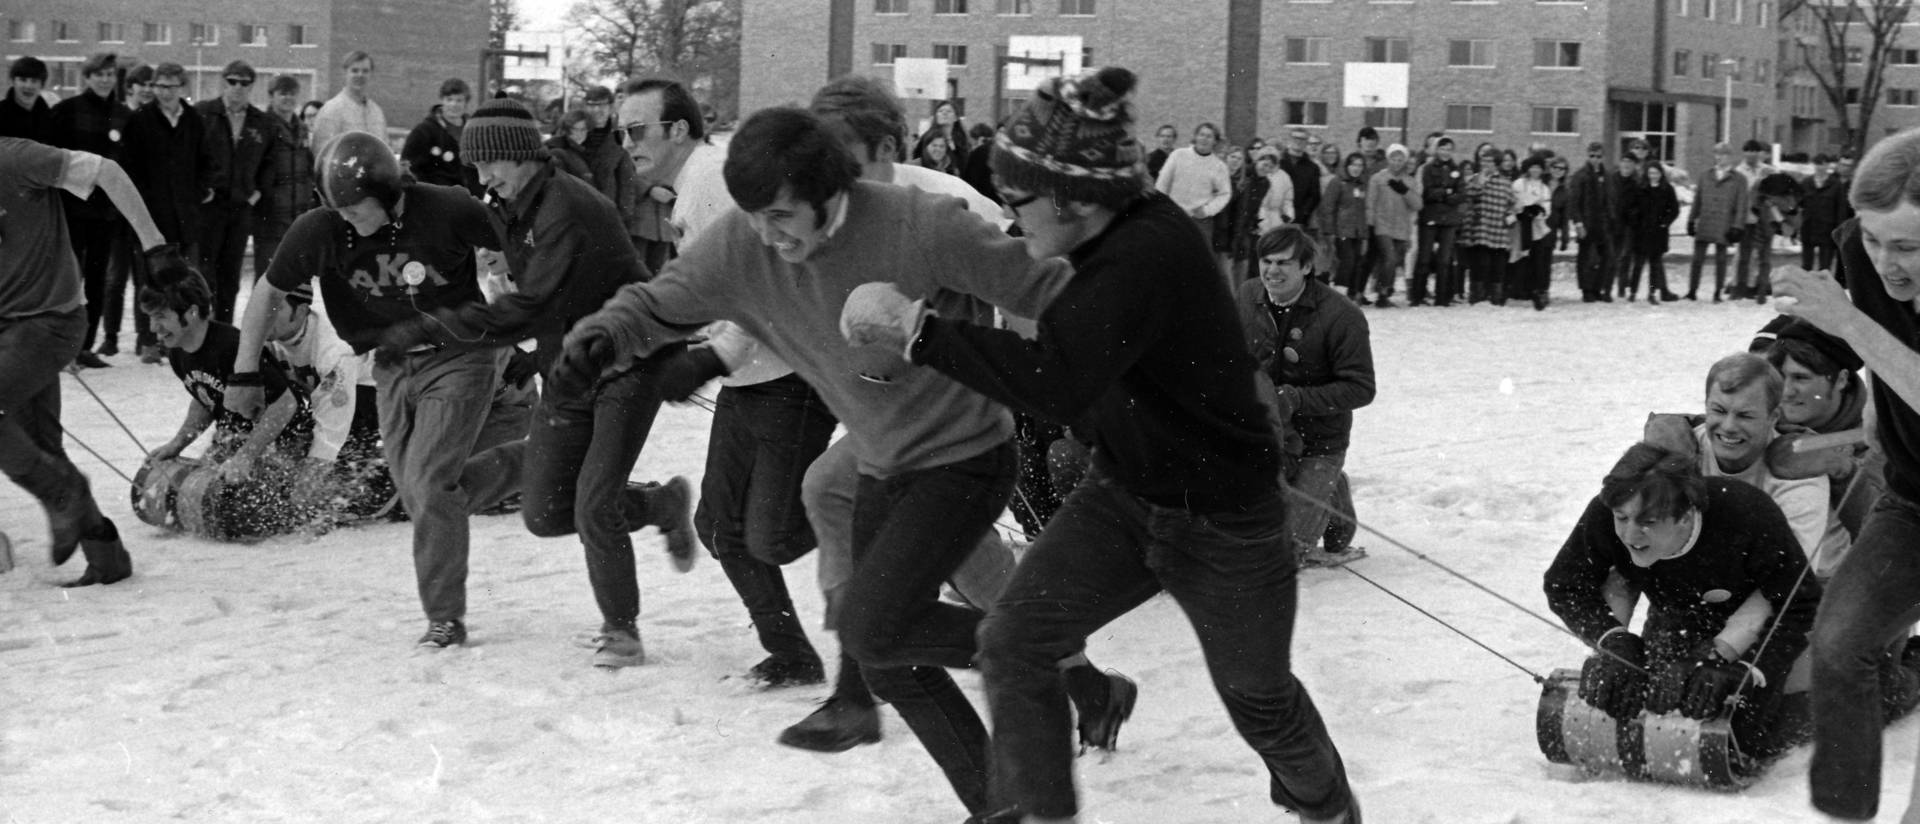 Male students competing in a sled race, ca. 1964-1971